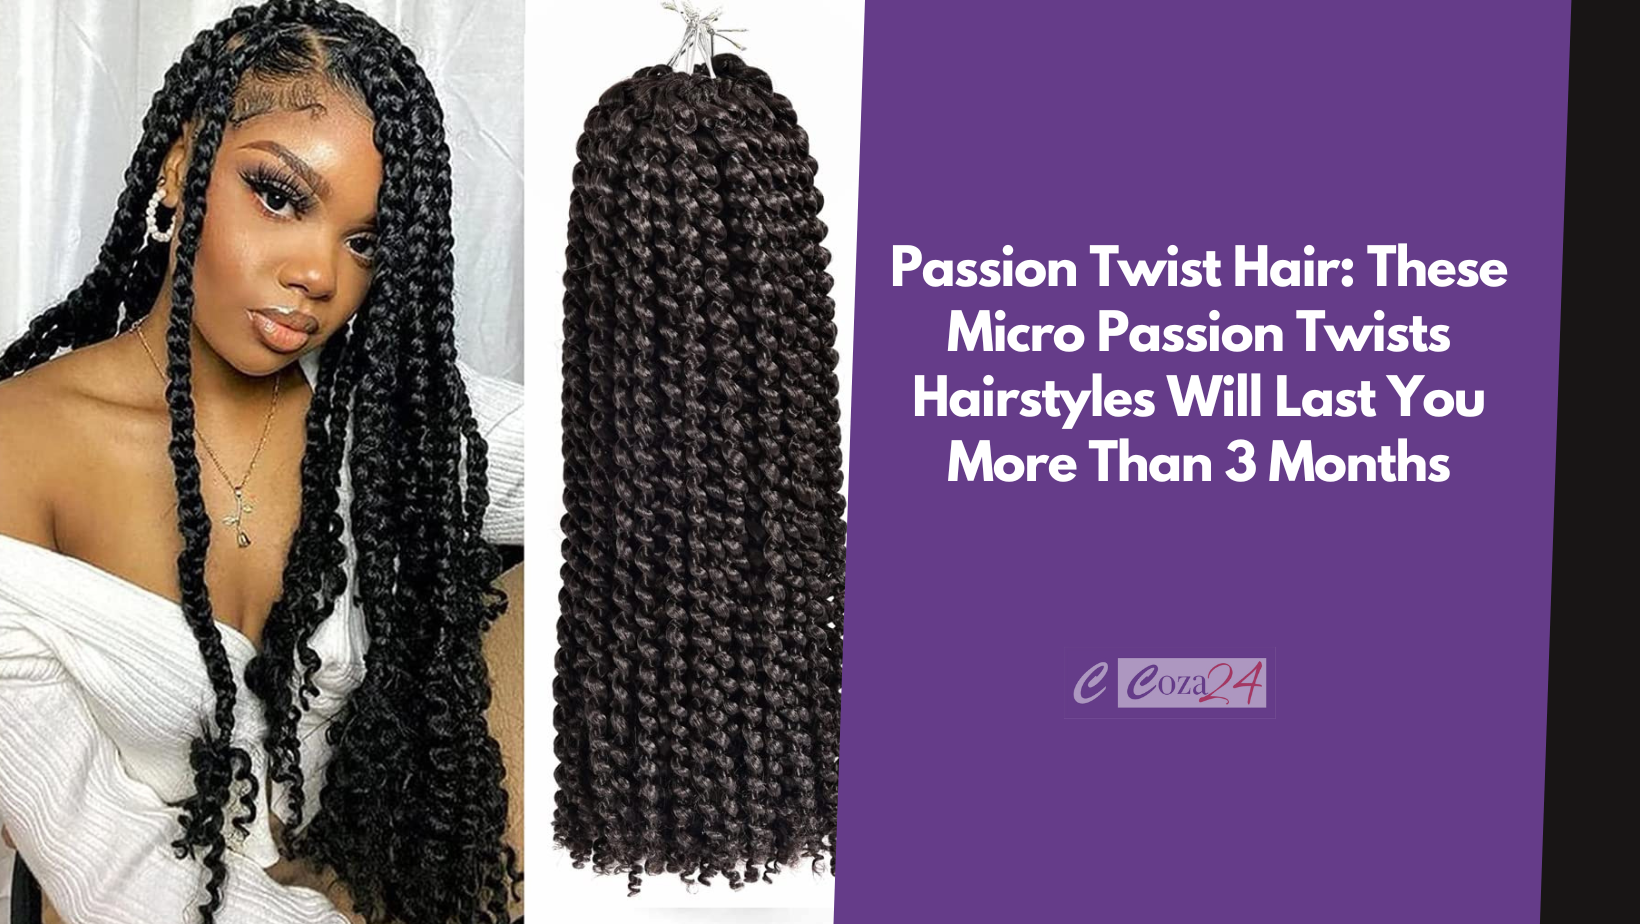 Passion Twist Hair: These Micro Passion Twists Hairstyles Will Last You More Than 3 Months